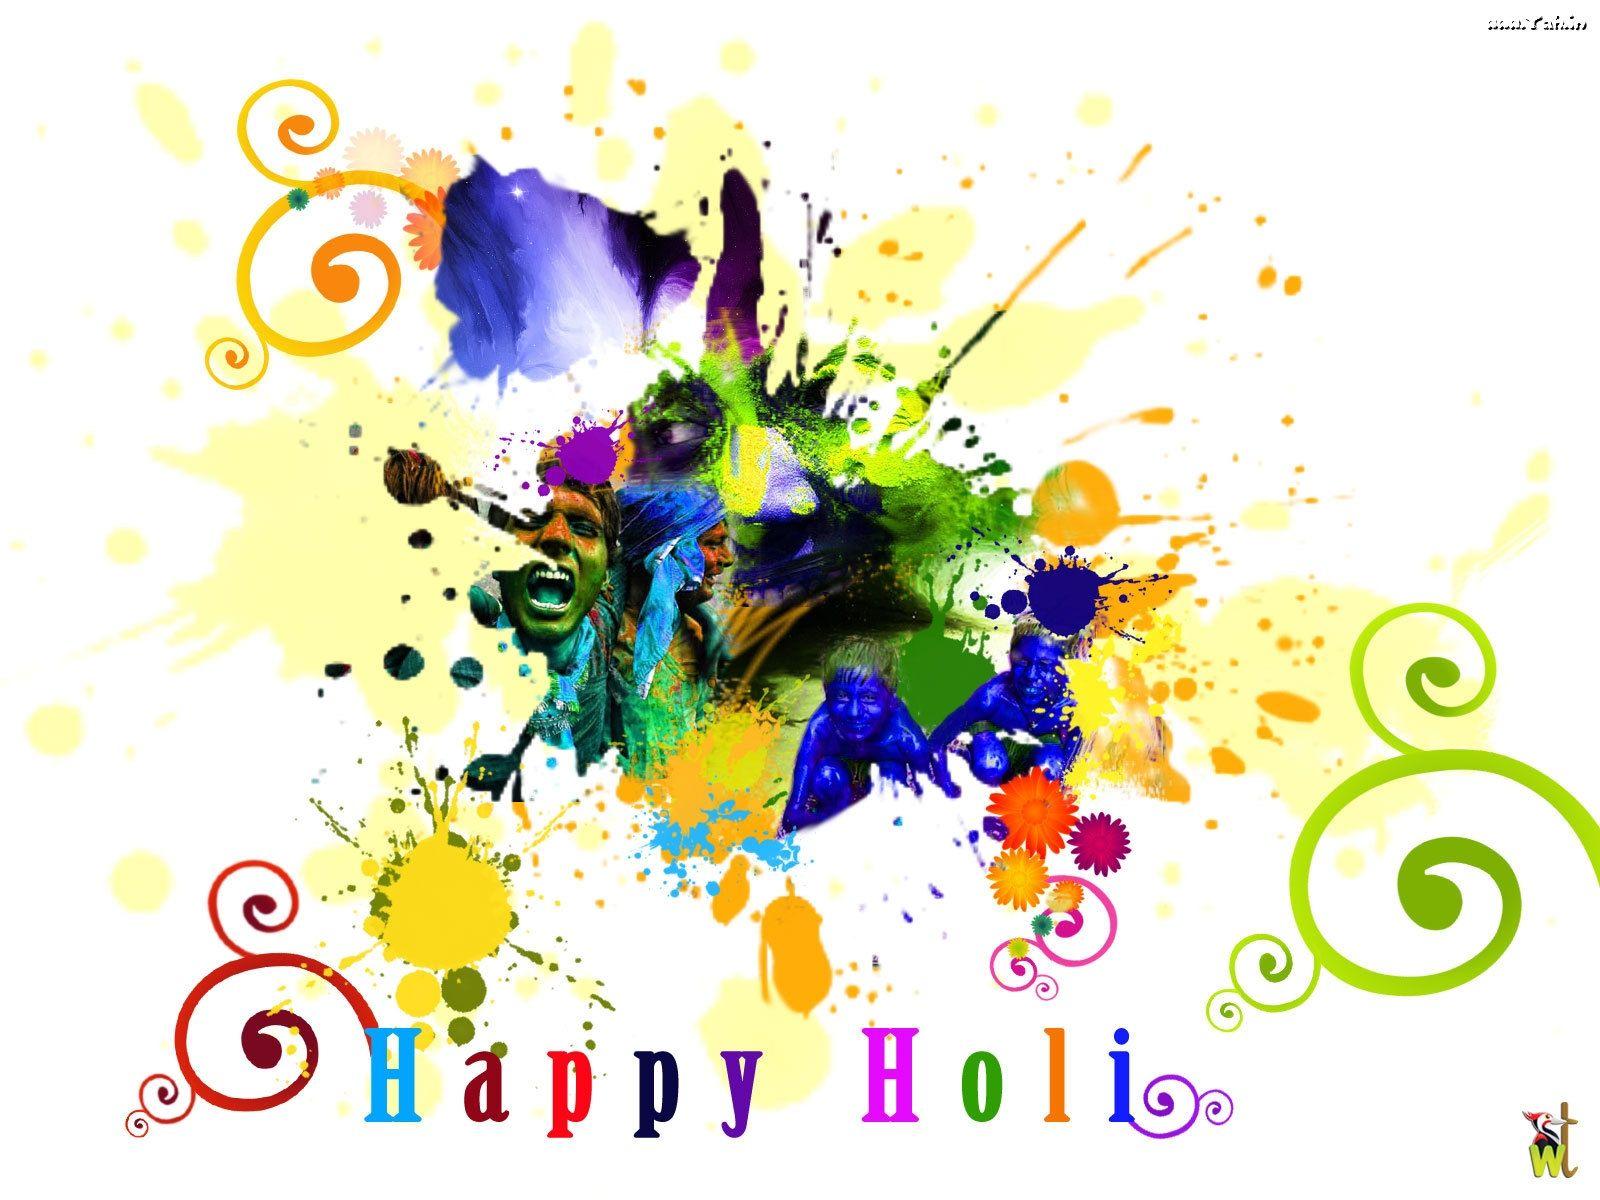 cool holi Wallpaper cool holi Wallpaper HD Download cool holi Wallpaper. from the above display reso. Happy holi wallpaper, Happy holi, Holi image